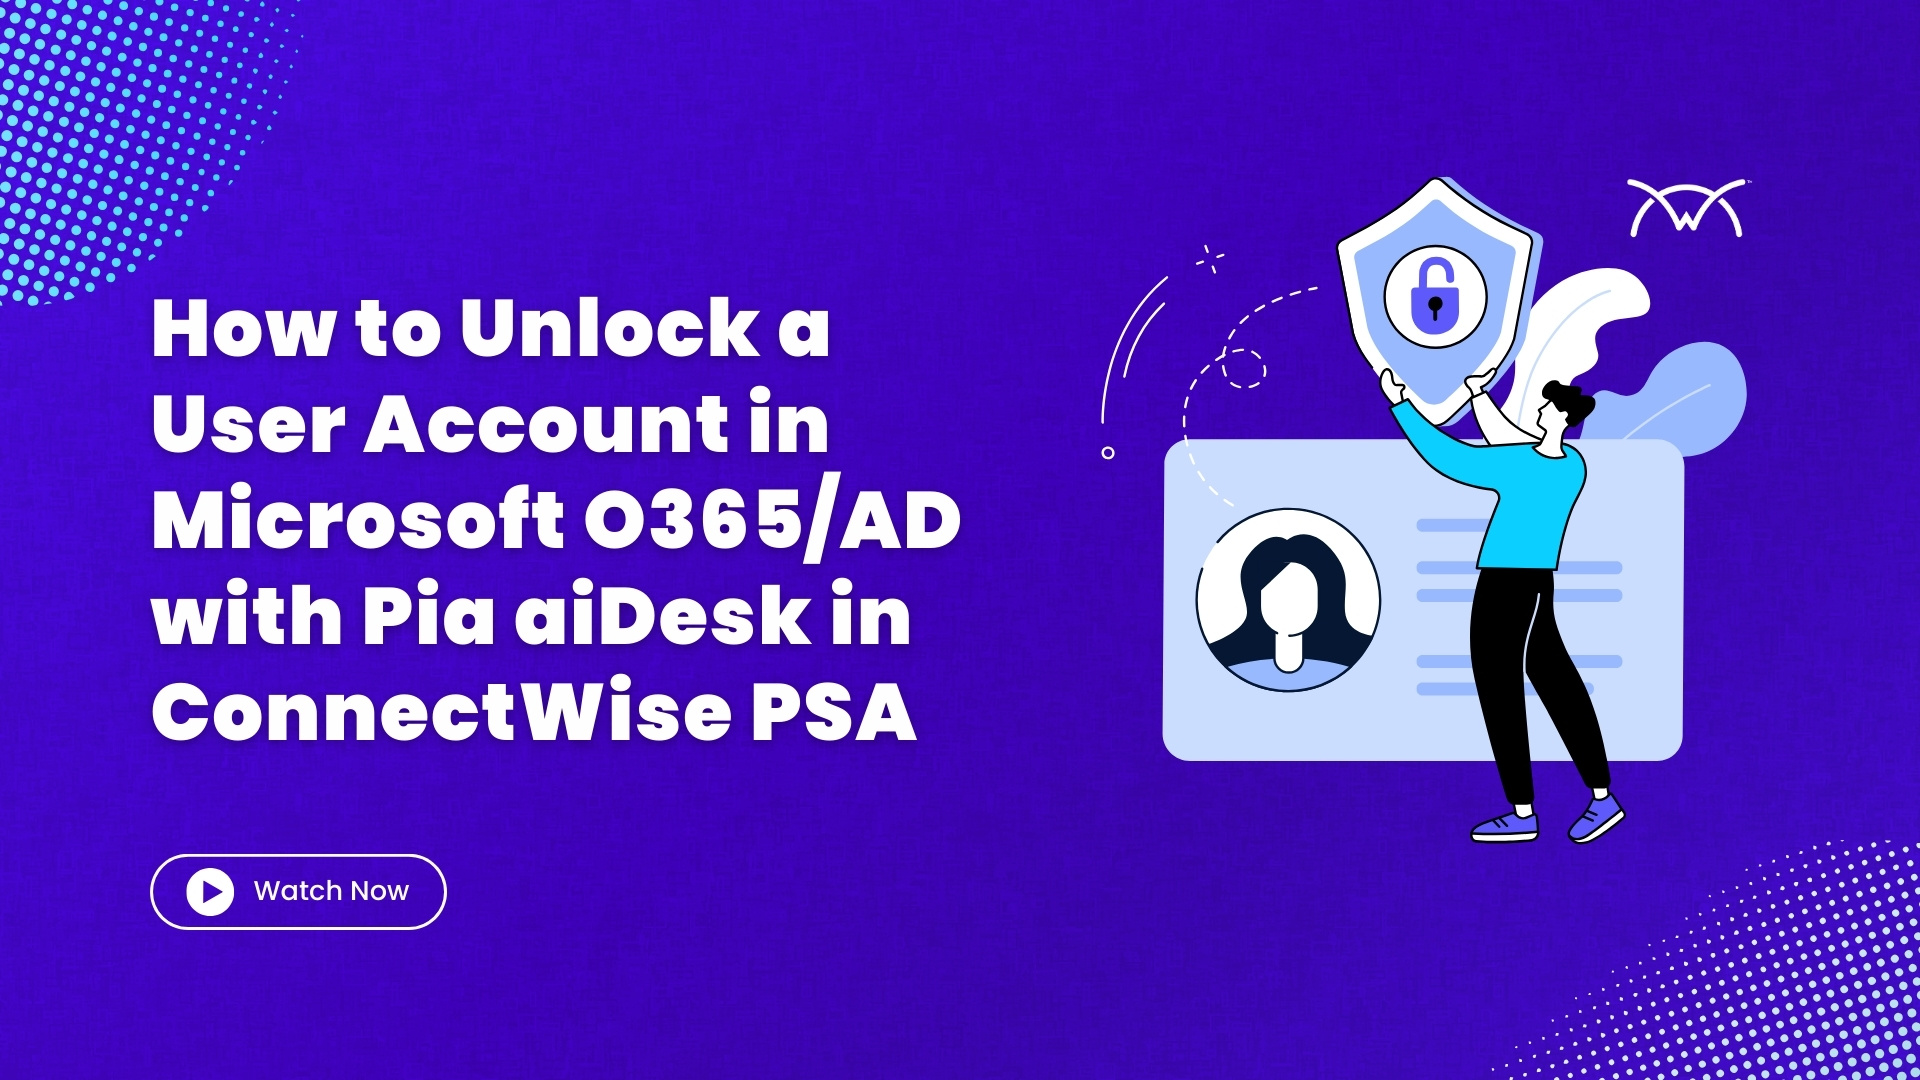 How to Unlock a User Account in MS O365/AD with Pia aiDesk in ConnectWise